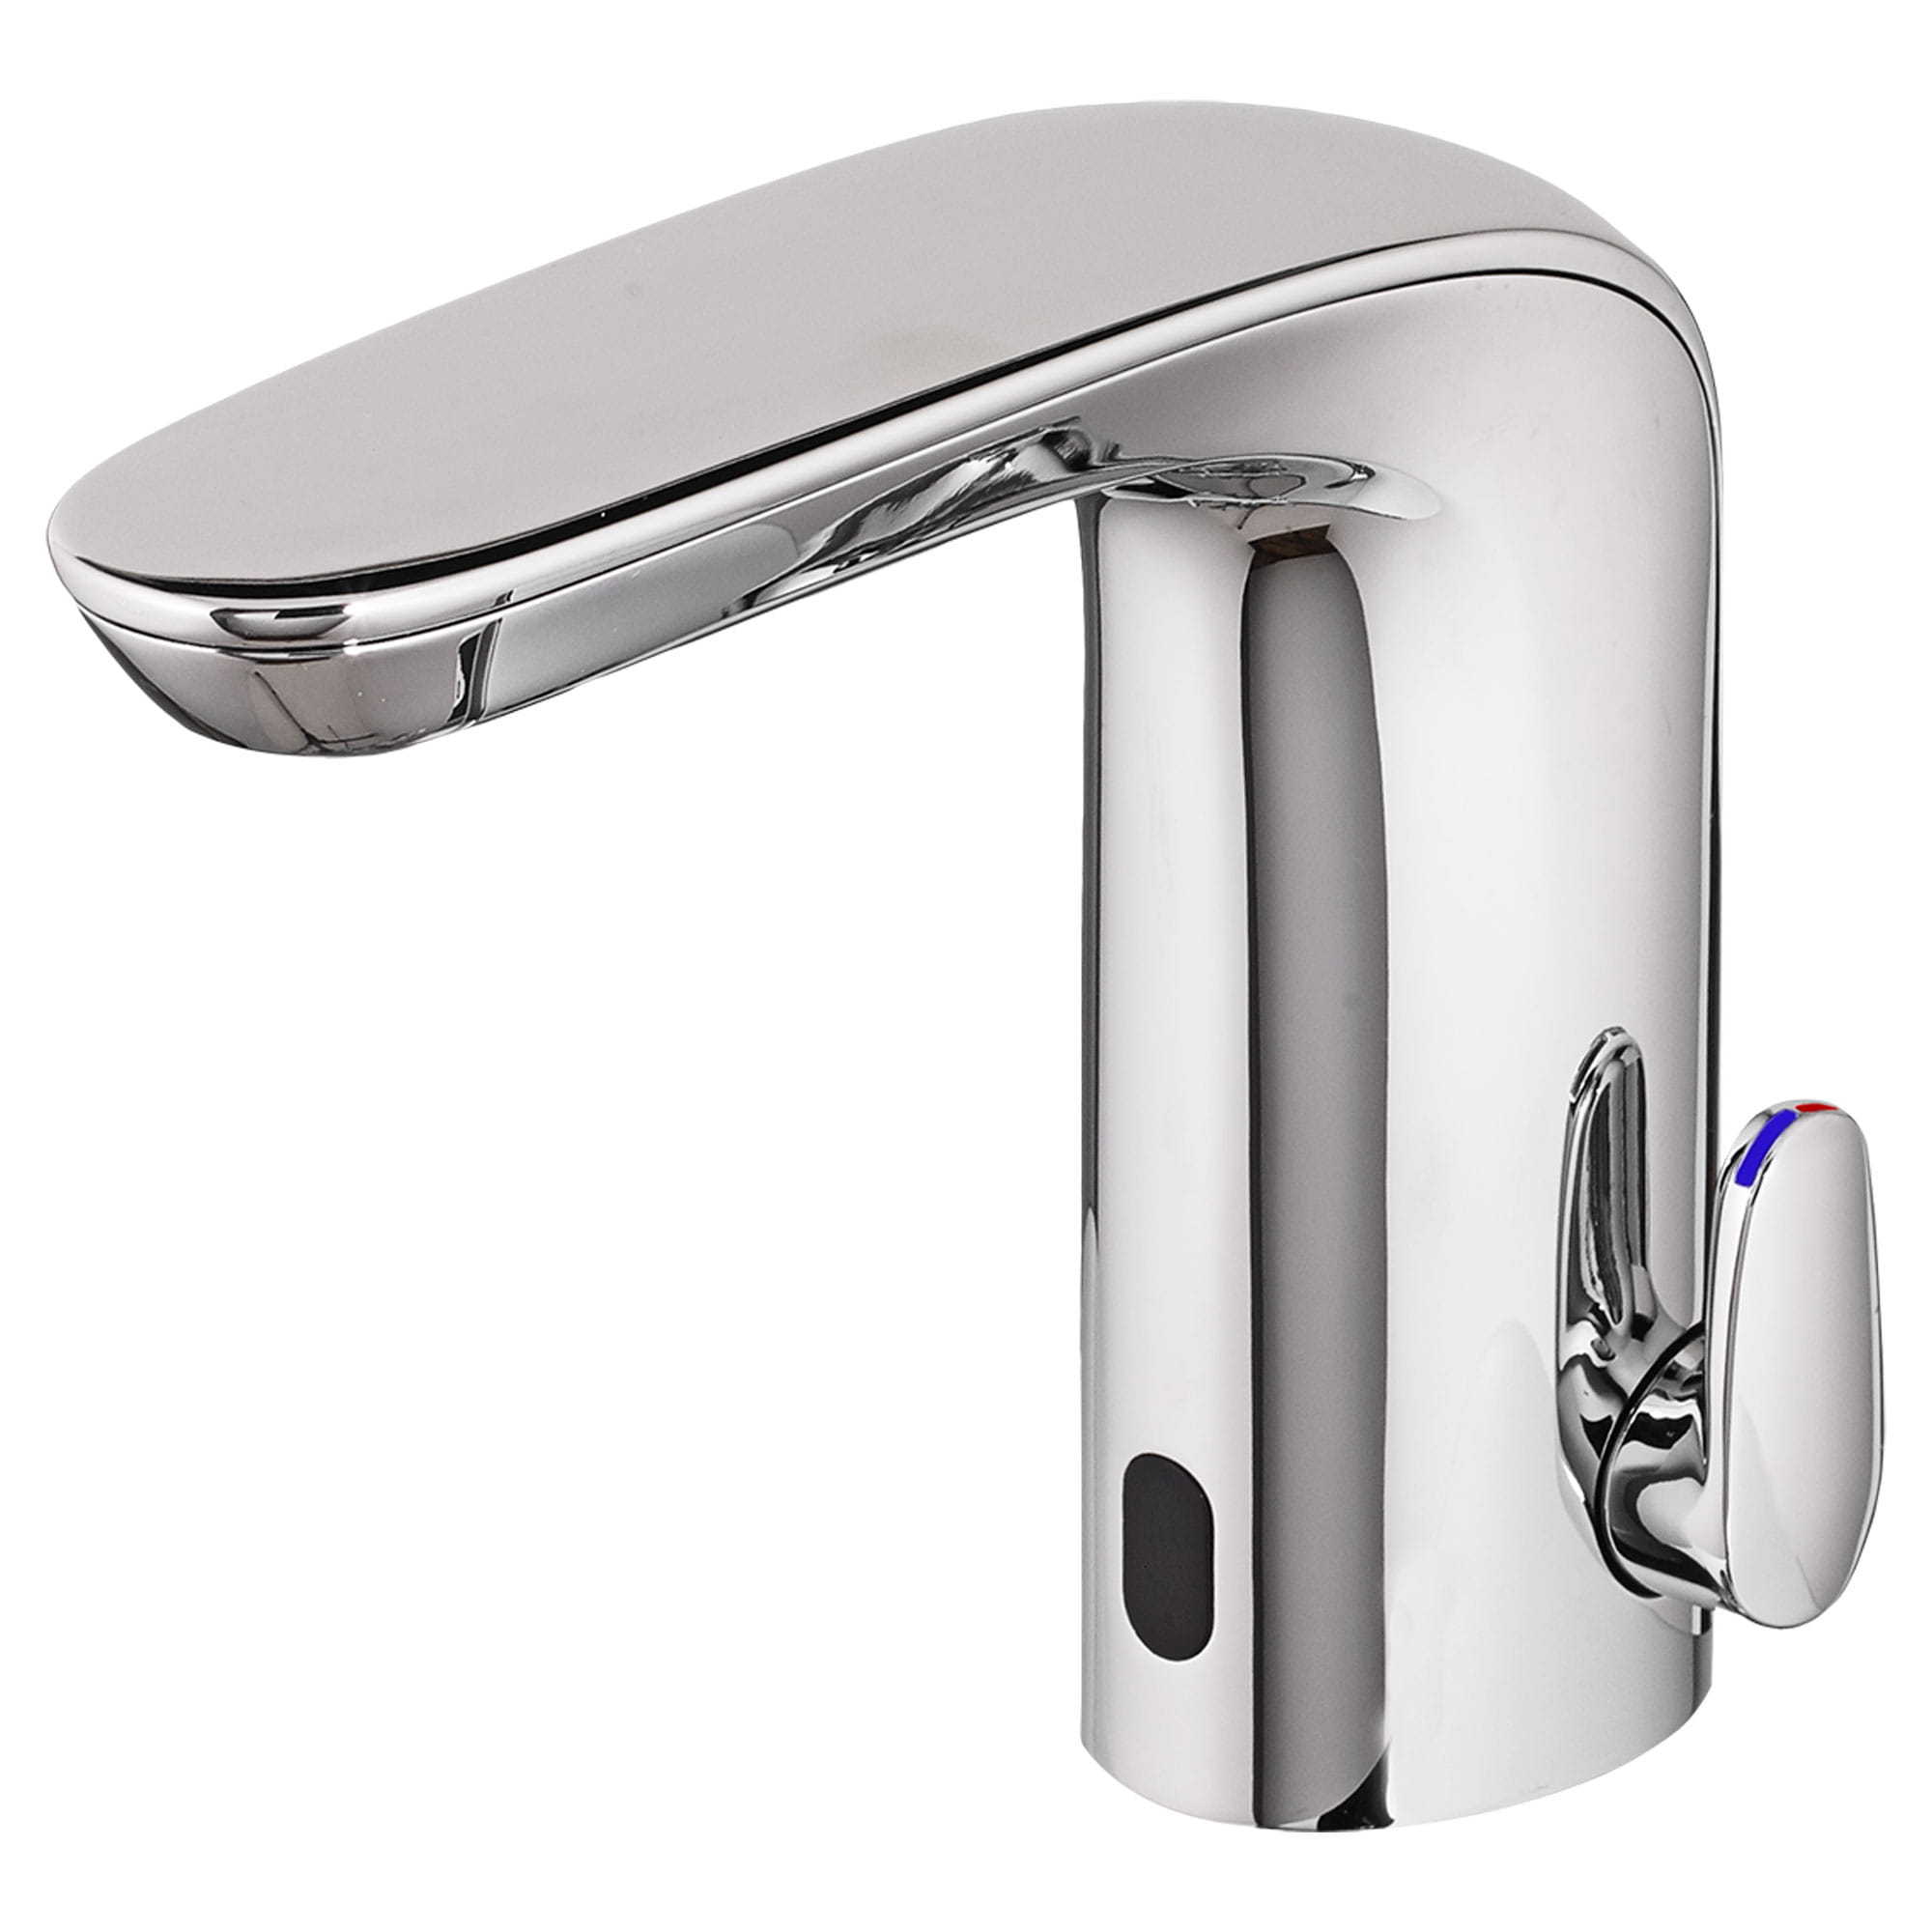 NextGen™ Selectronic® Touchless Faucet, Battery-Powered With SmarTherm Safety Shut-Off + ADM, 1.5 gpm/5.7 Lpm